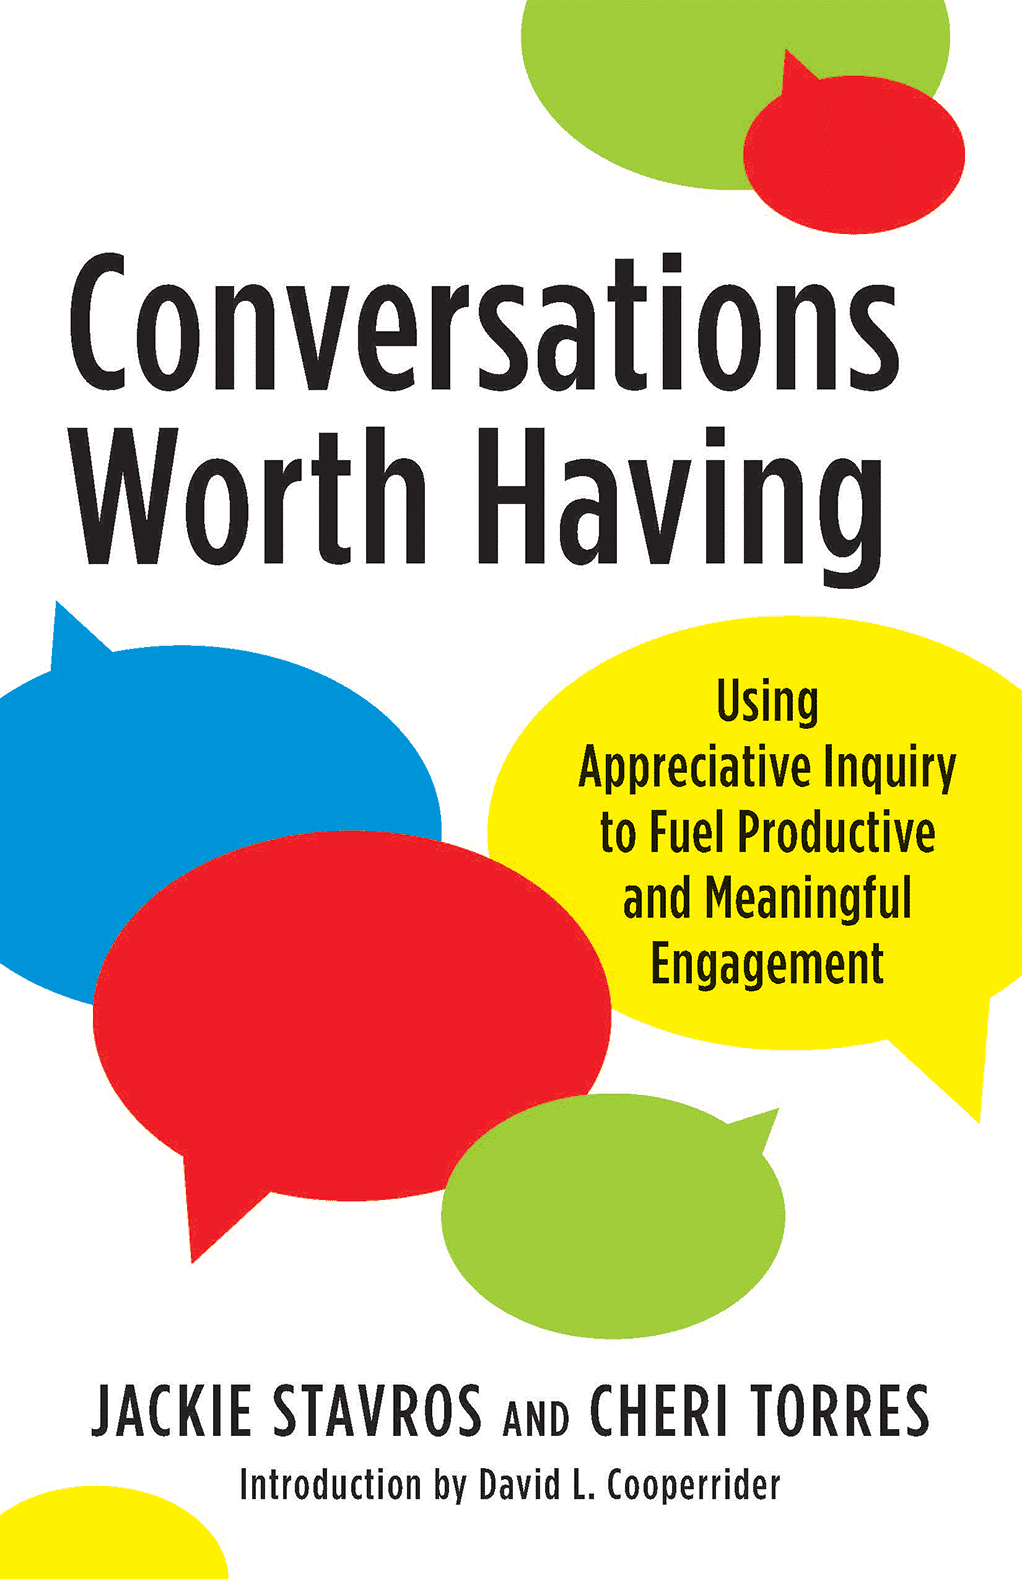 Southpac international recommends Jackie Stavros & Cheri Torres book "Conversations Worth Having"